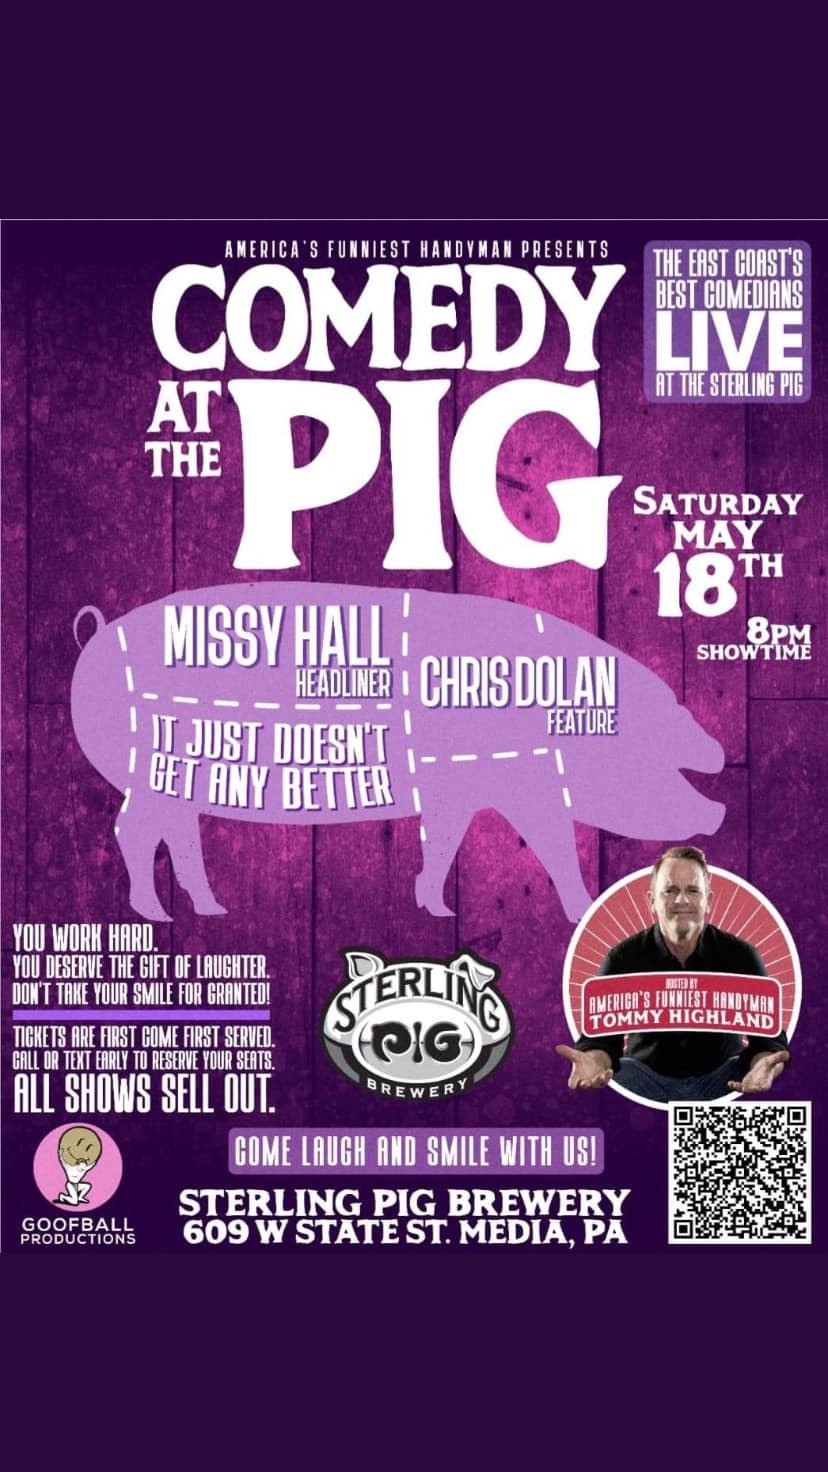 Come laugh with Tommy Highland, Chris Dolan and yours truly! Get your tickets soon, as this is a small venue and will sell out quickly!

https://www.eventbrite.com/e/comedy-at-the-pig-may-18-2025-tickets-882961761397?utm_experiment=test_share_listing